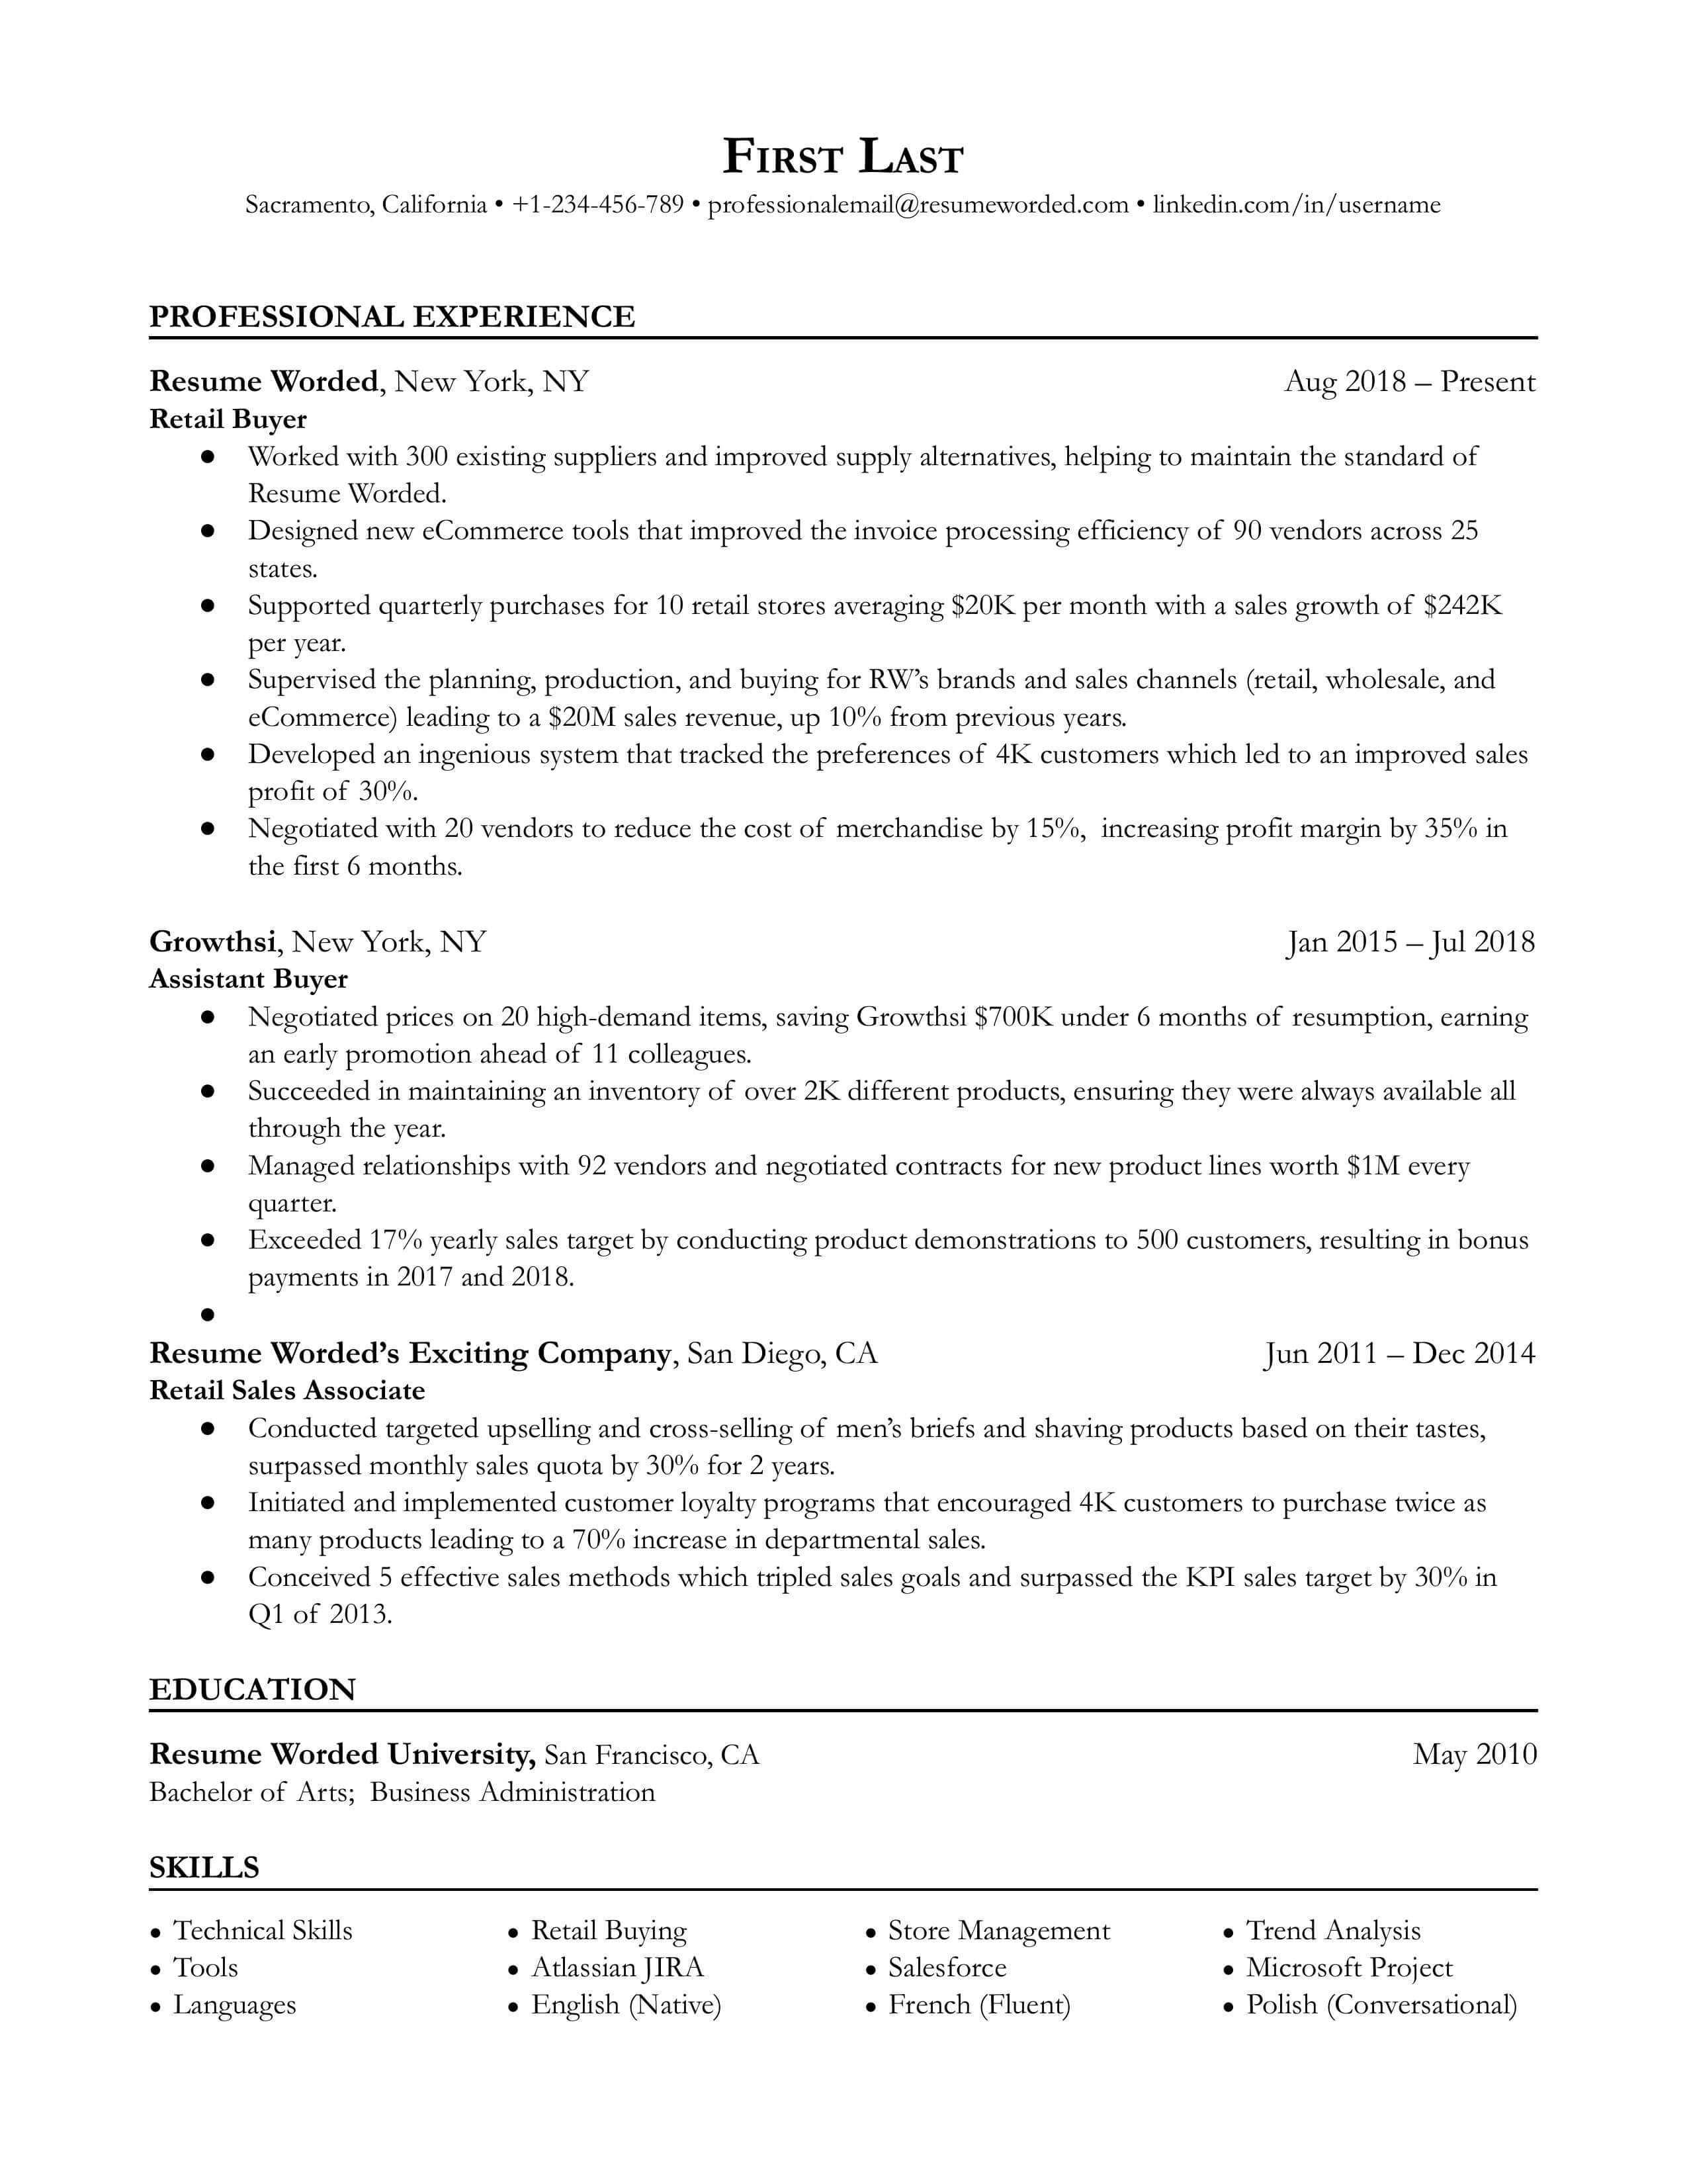 Picture of a resume for a retail buyer role, emphasizing negotiation, procurement, and analytical skills.